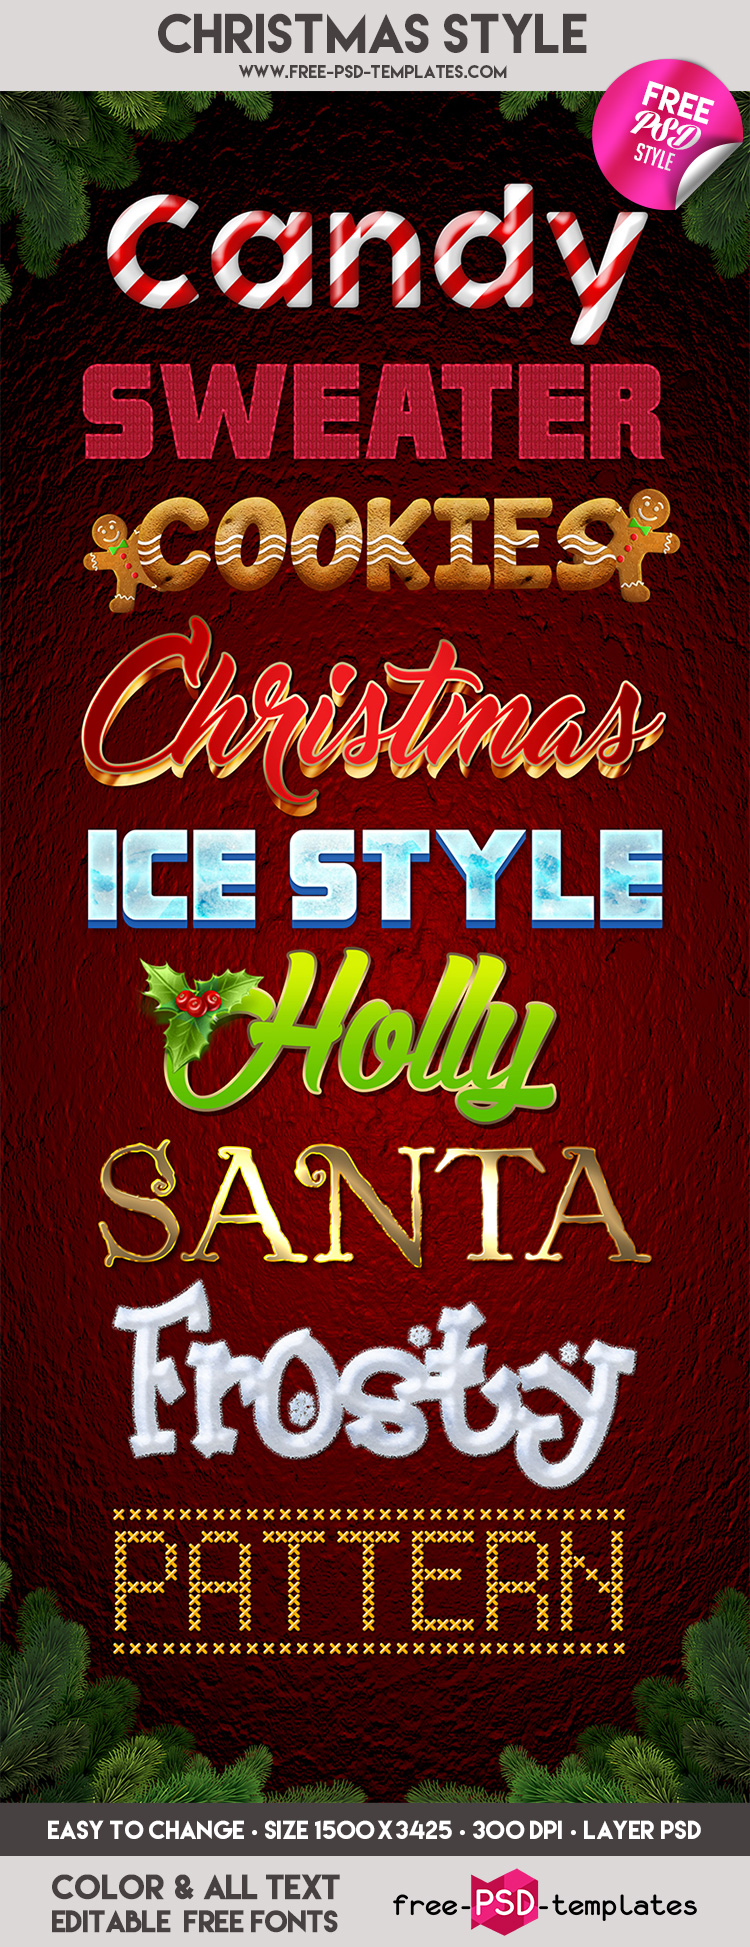 preview_christmas_style